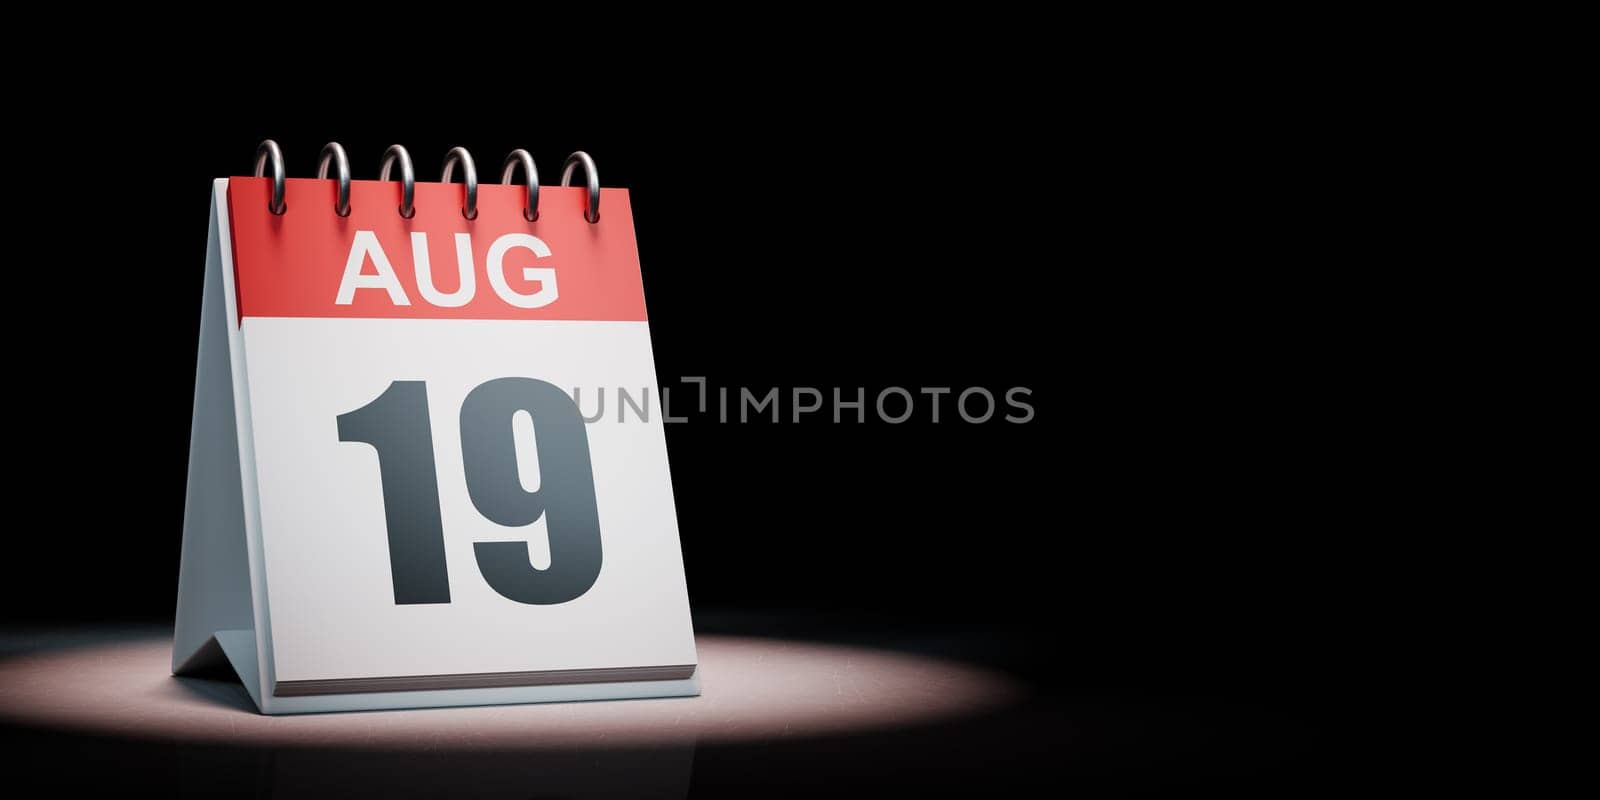 Red and White August 19 Desk Calendar Spotlighted on Black Background with Copy Space 3D Illustration